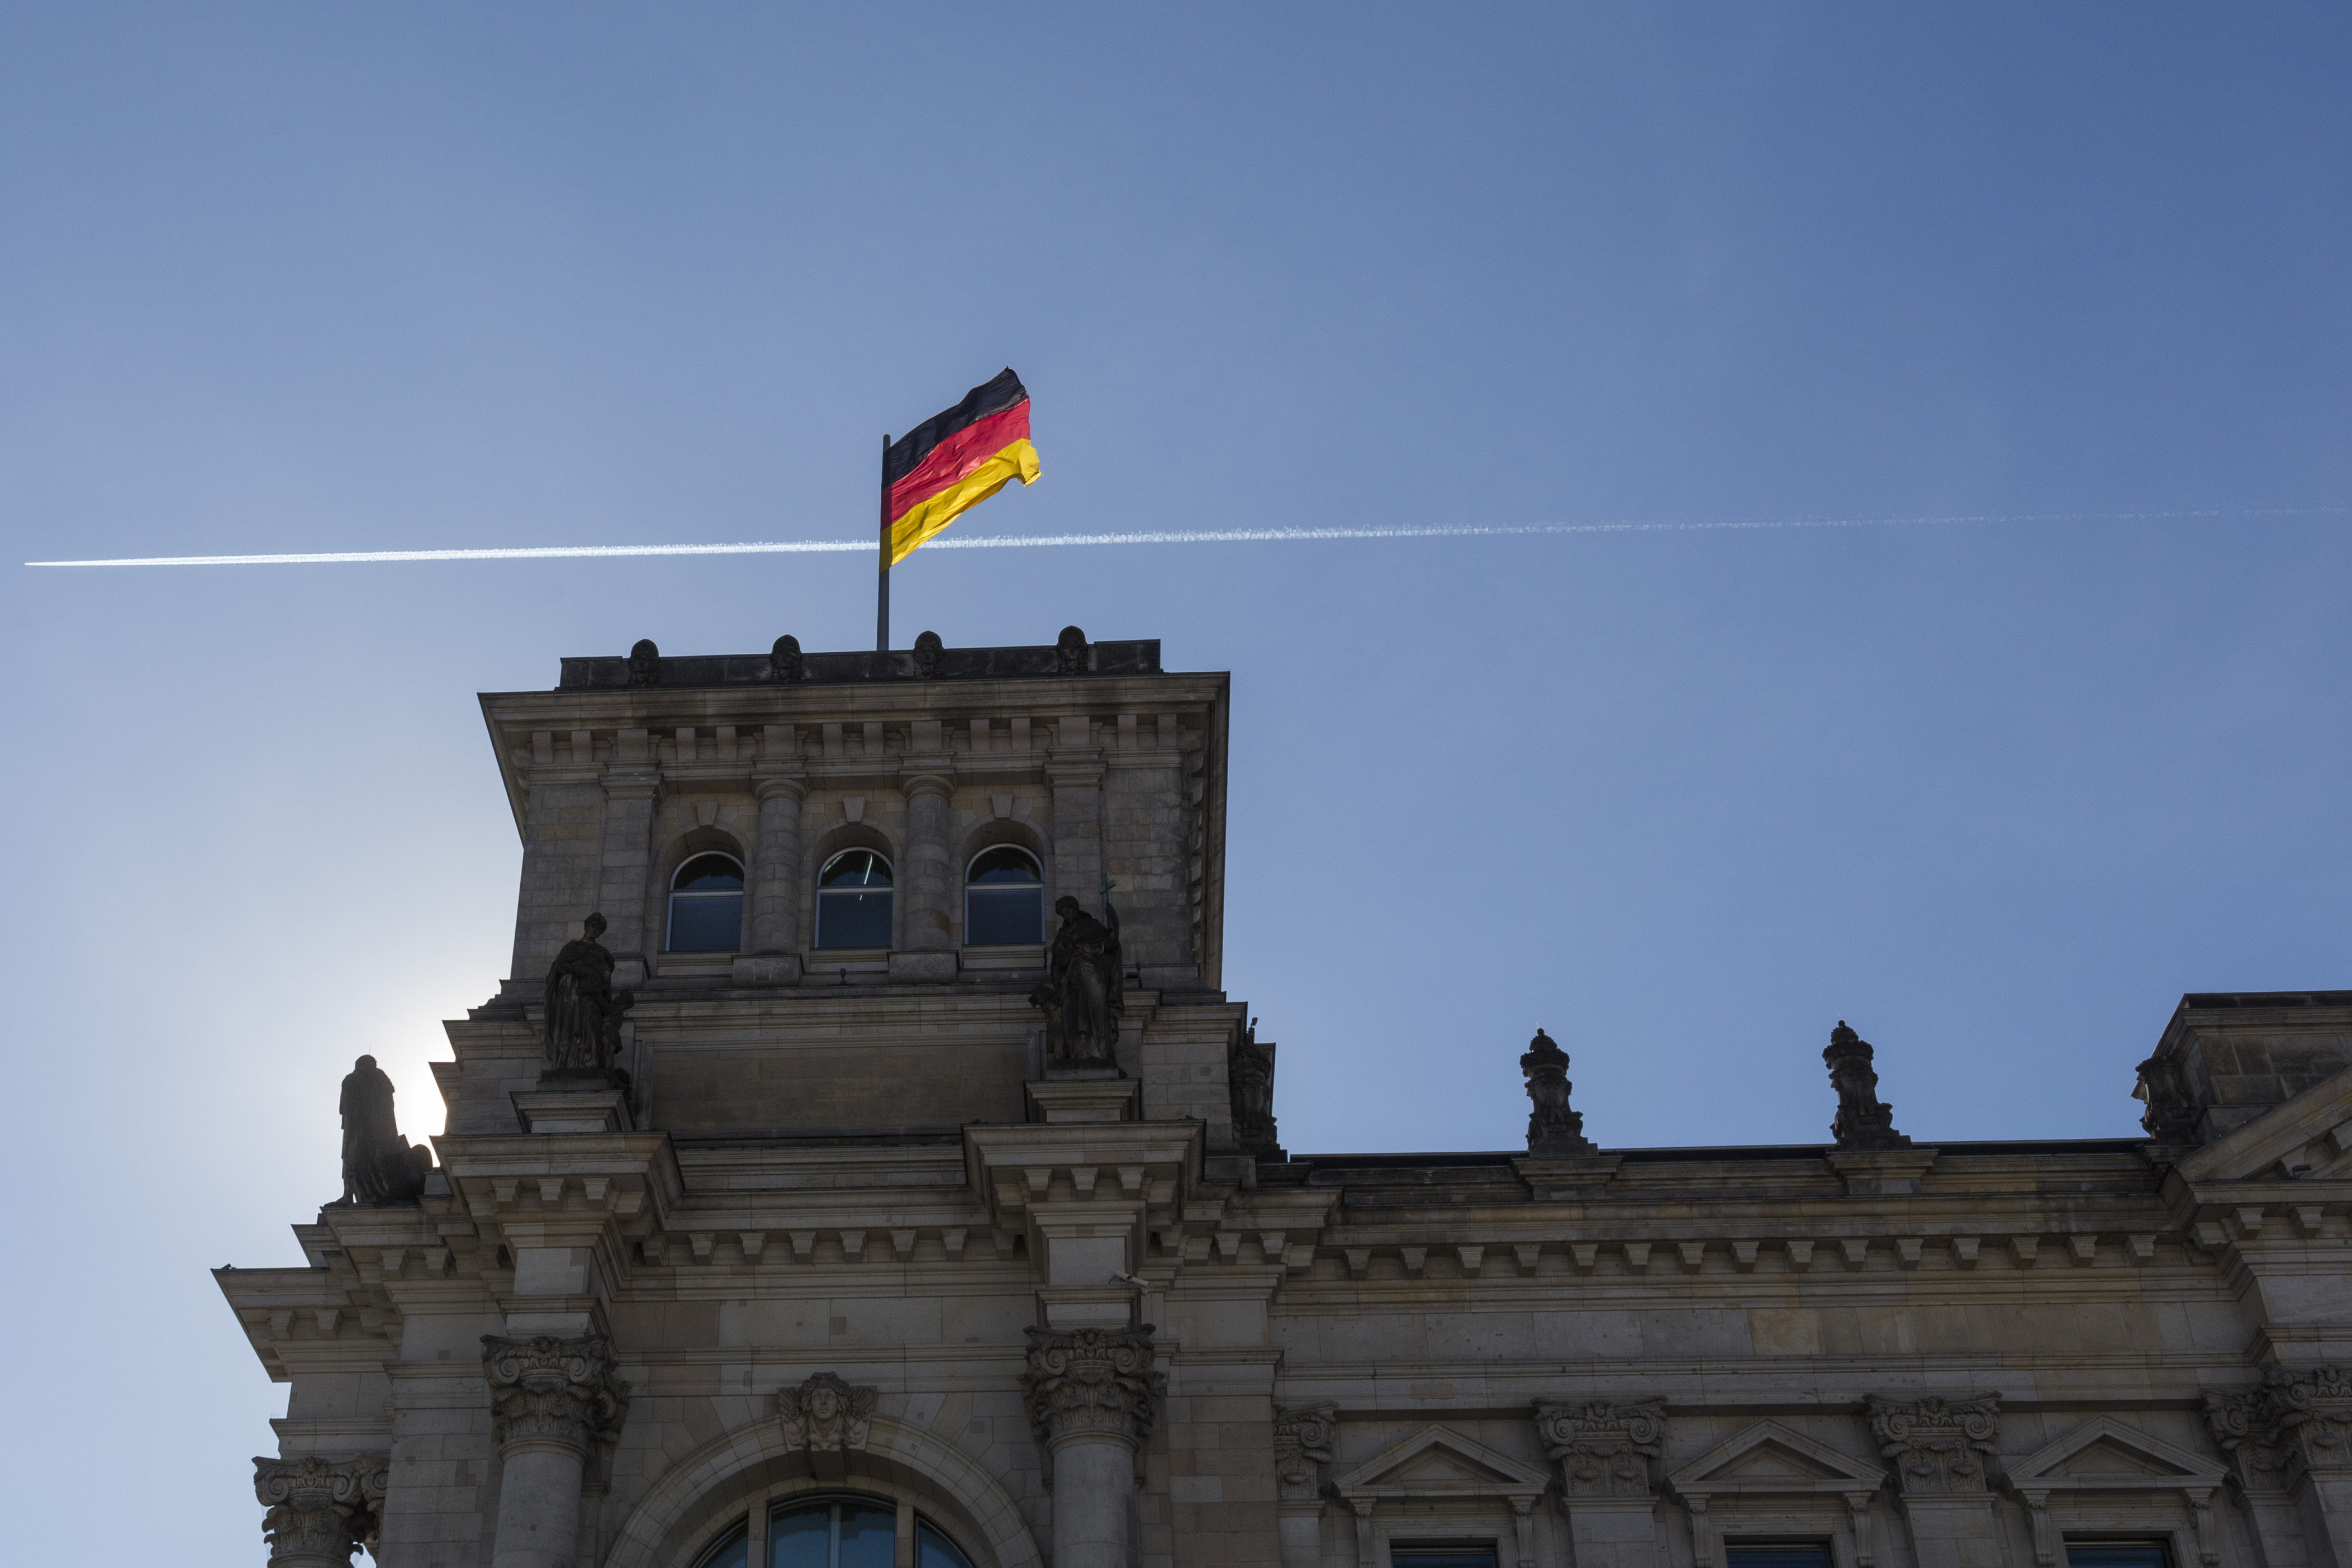 The German Parliament building with flag on February 24, 2014 in Berlin, Germany. (Marie Waldmann—Photothek/Getty Images)